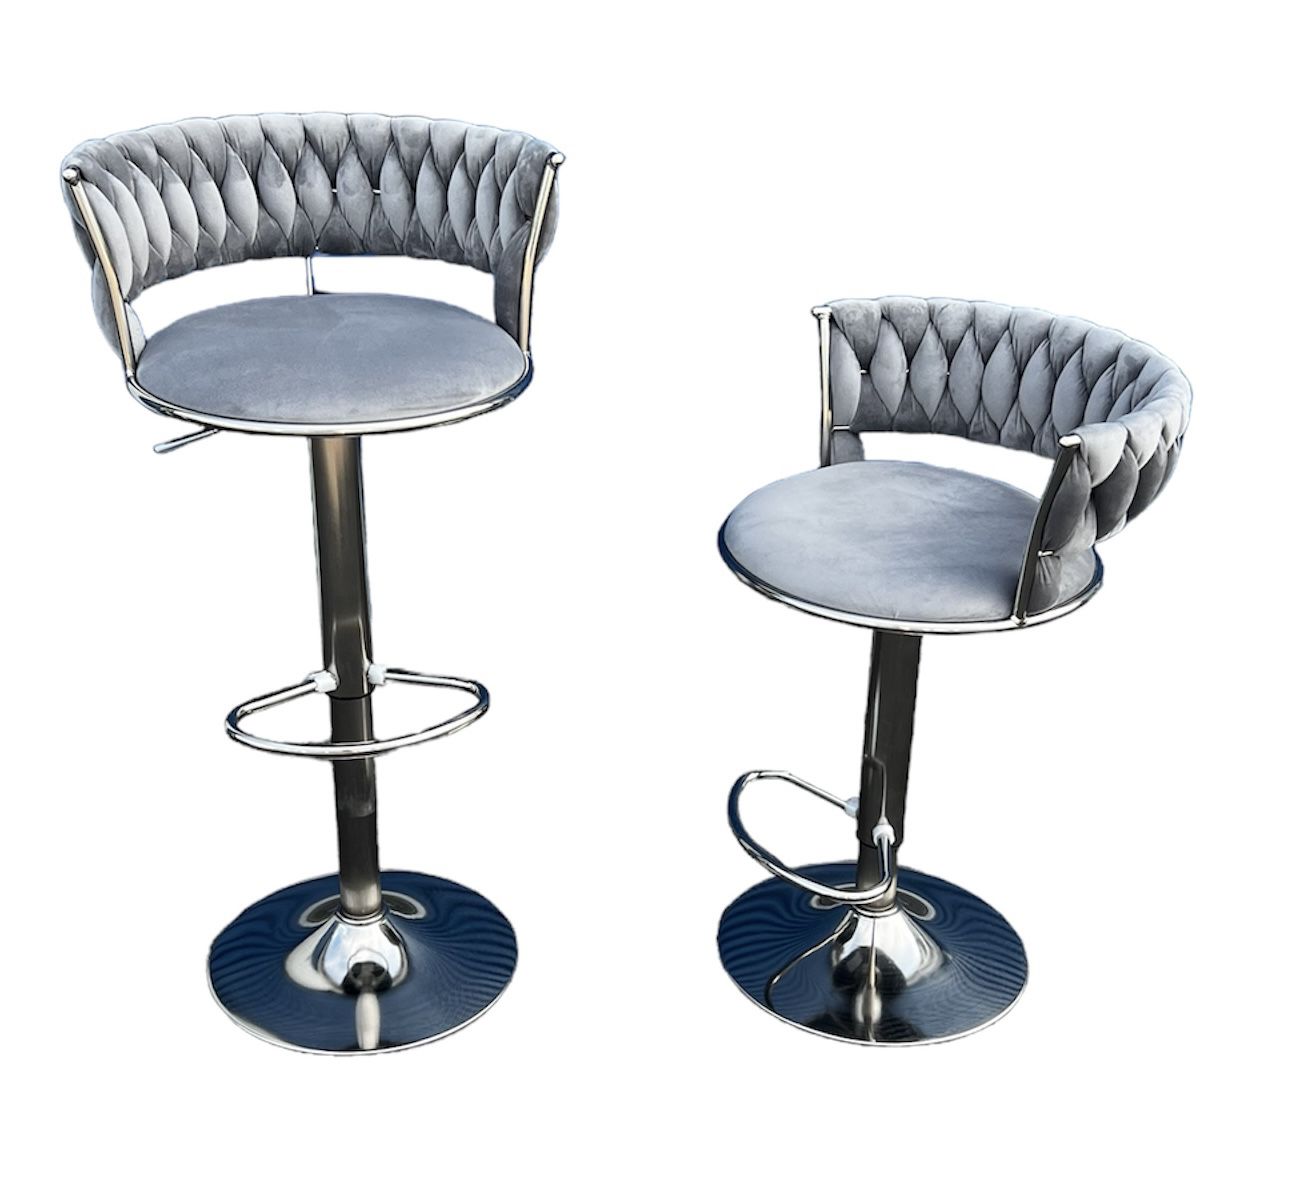 Velvet Bar Stools, Adjustable 360 Swivel Counter Height Barstools, Kitchen Stools for Island with Ba